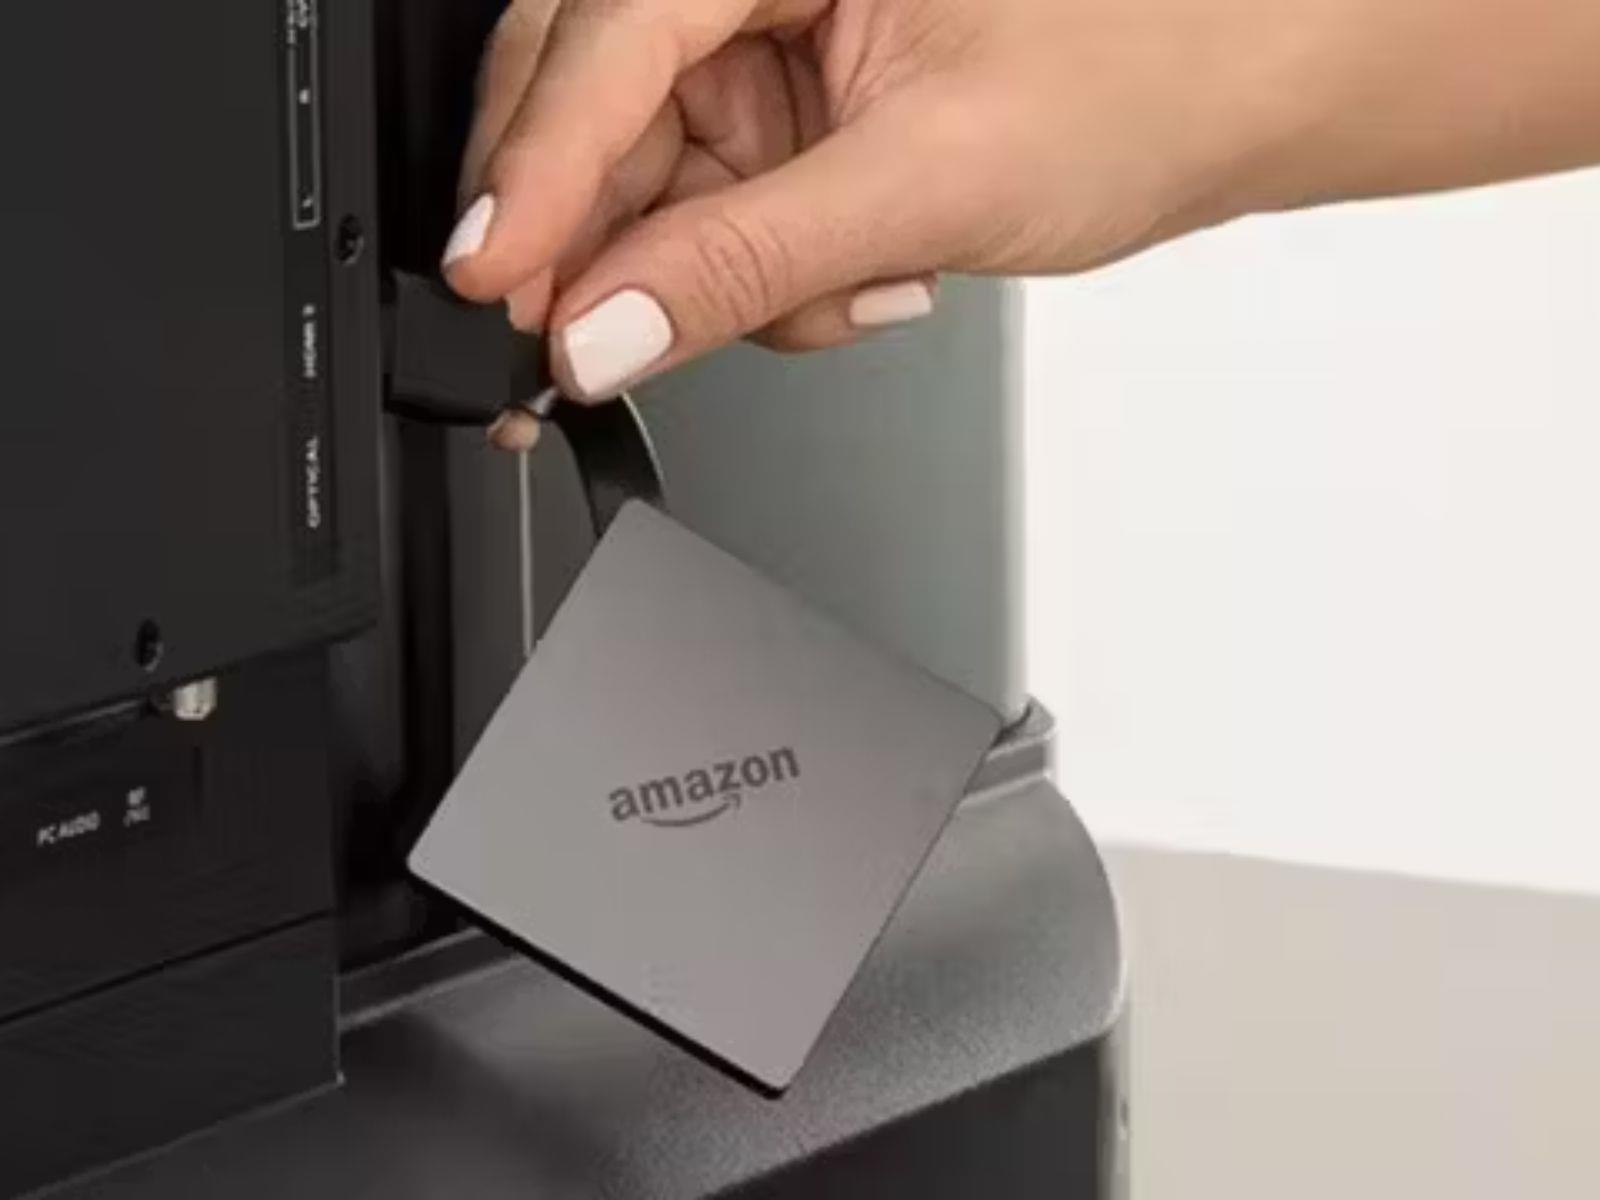 Image shows the Amazon Fire TV Pendant being plugged into a tv